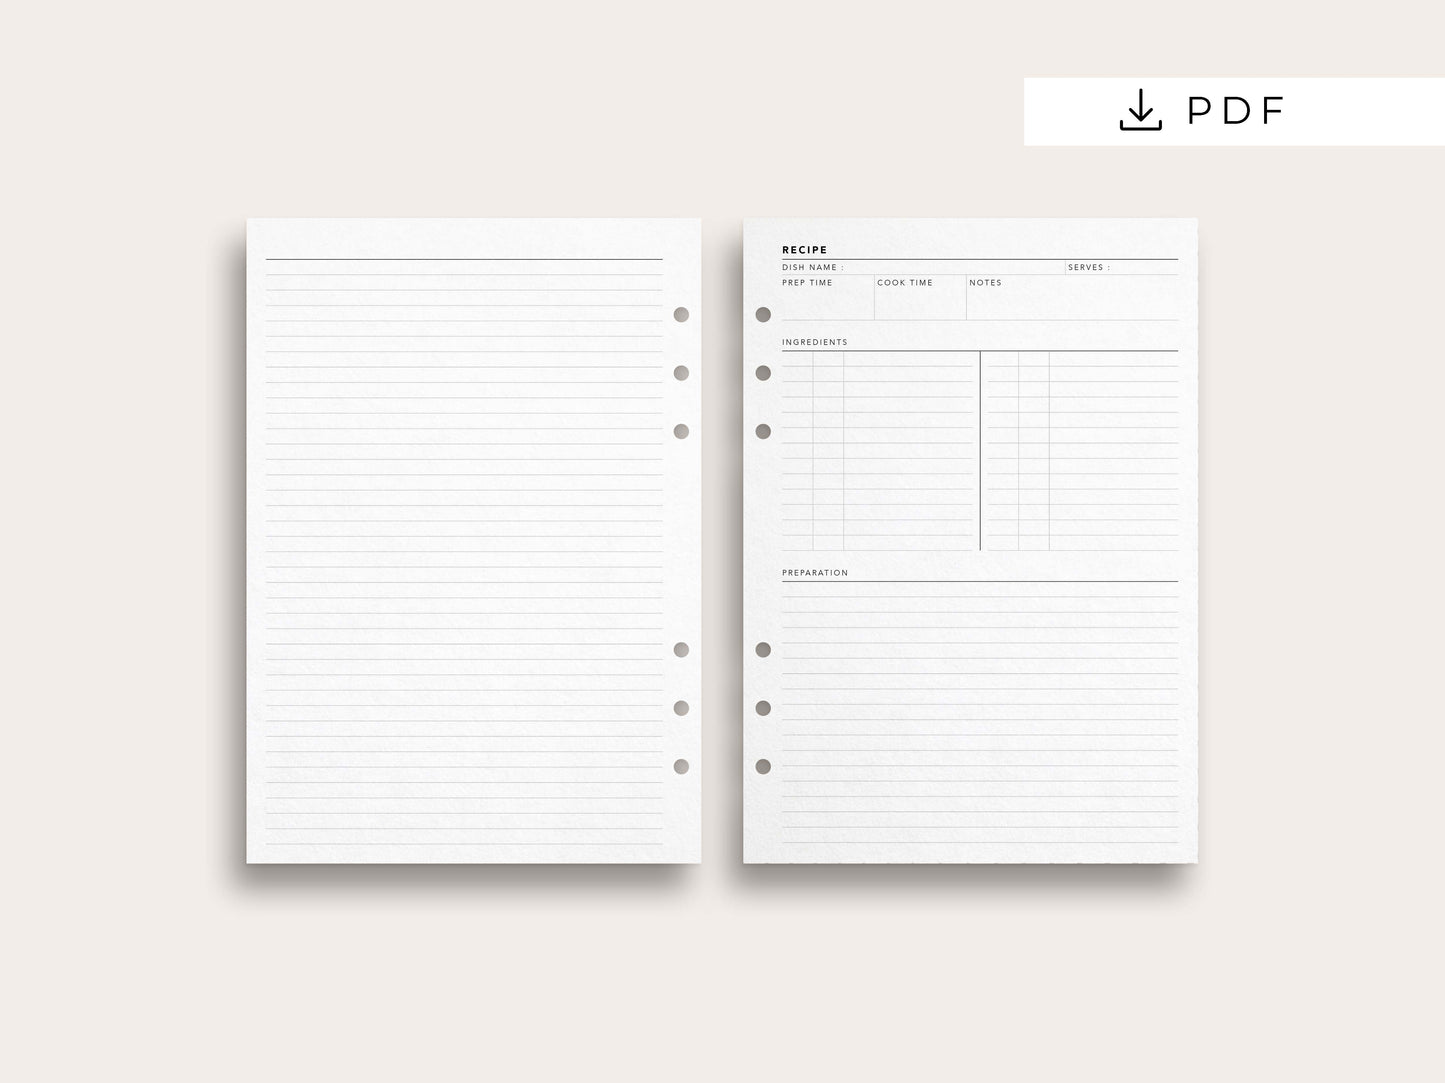 Designed By You 005: Recipe Planner